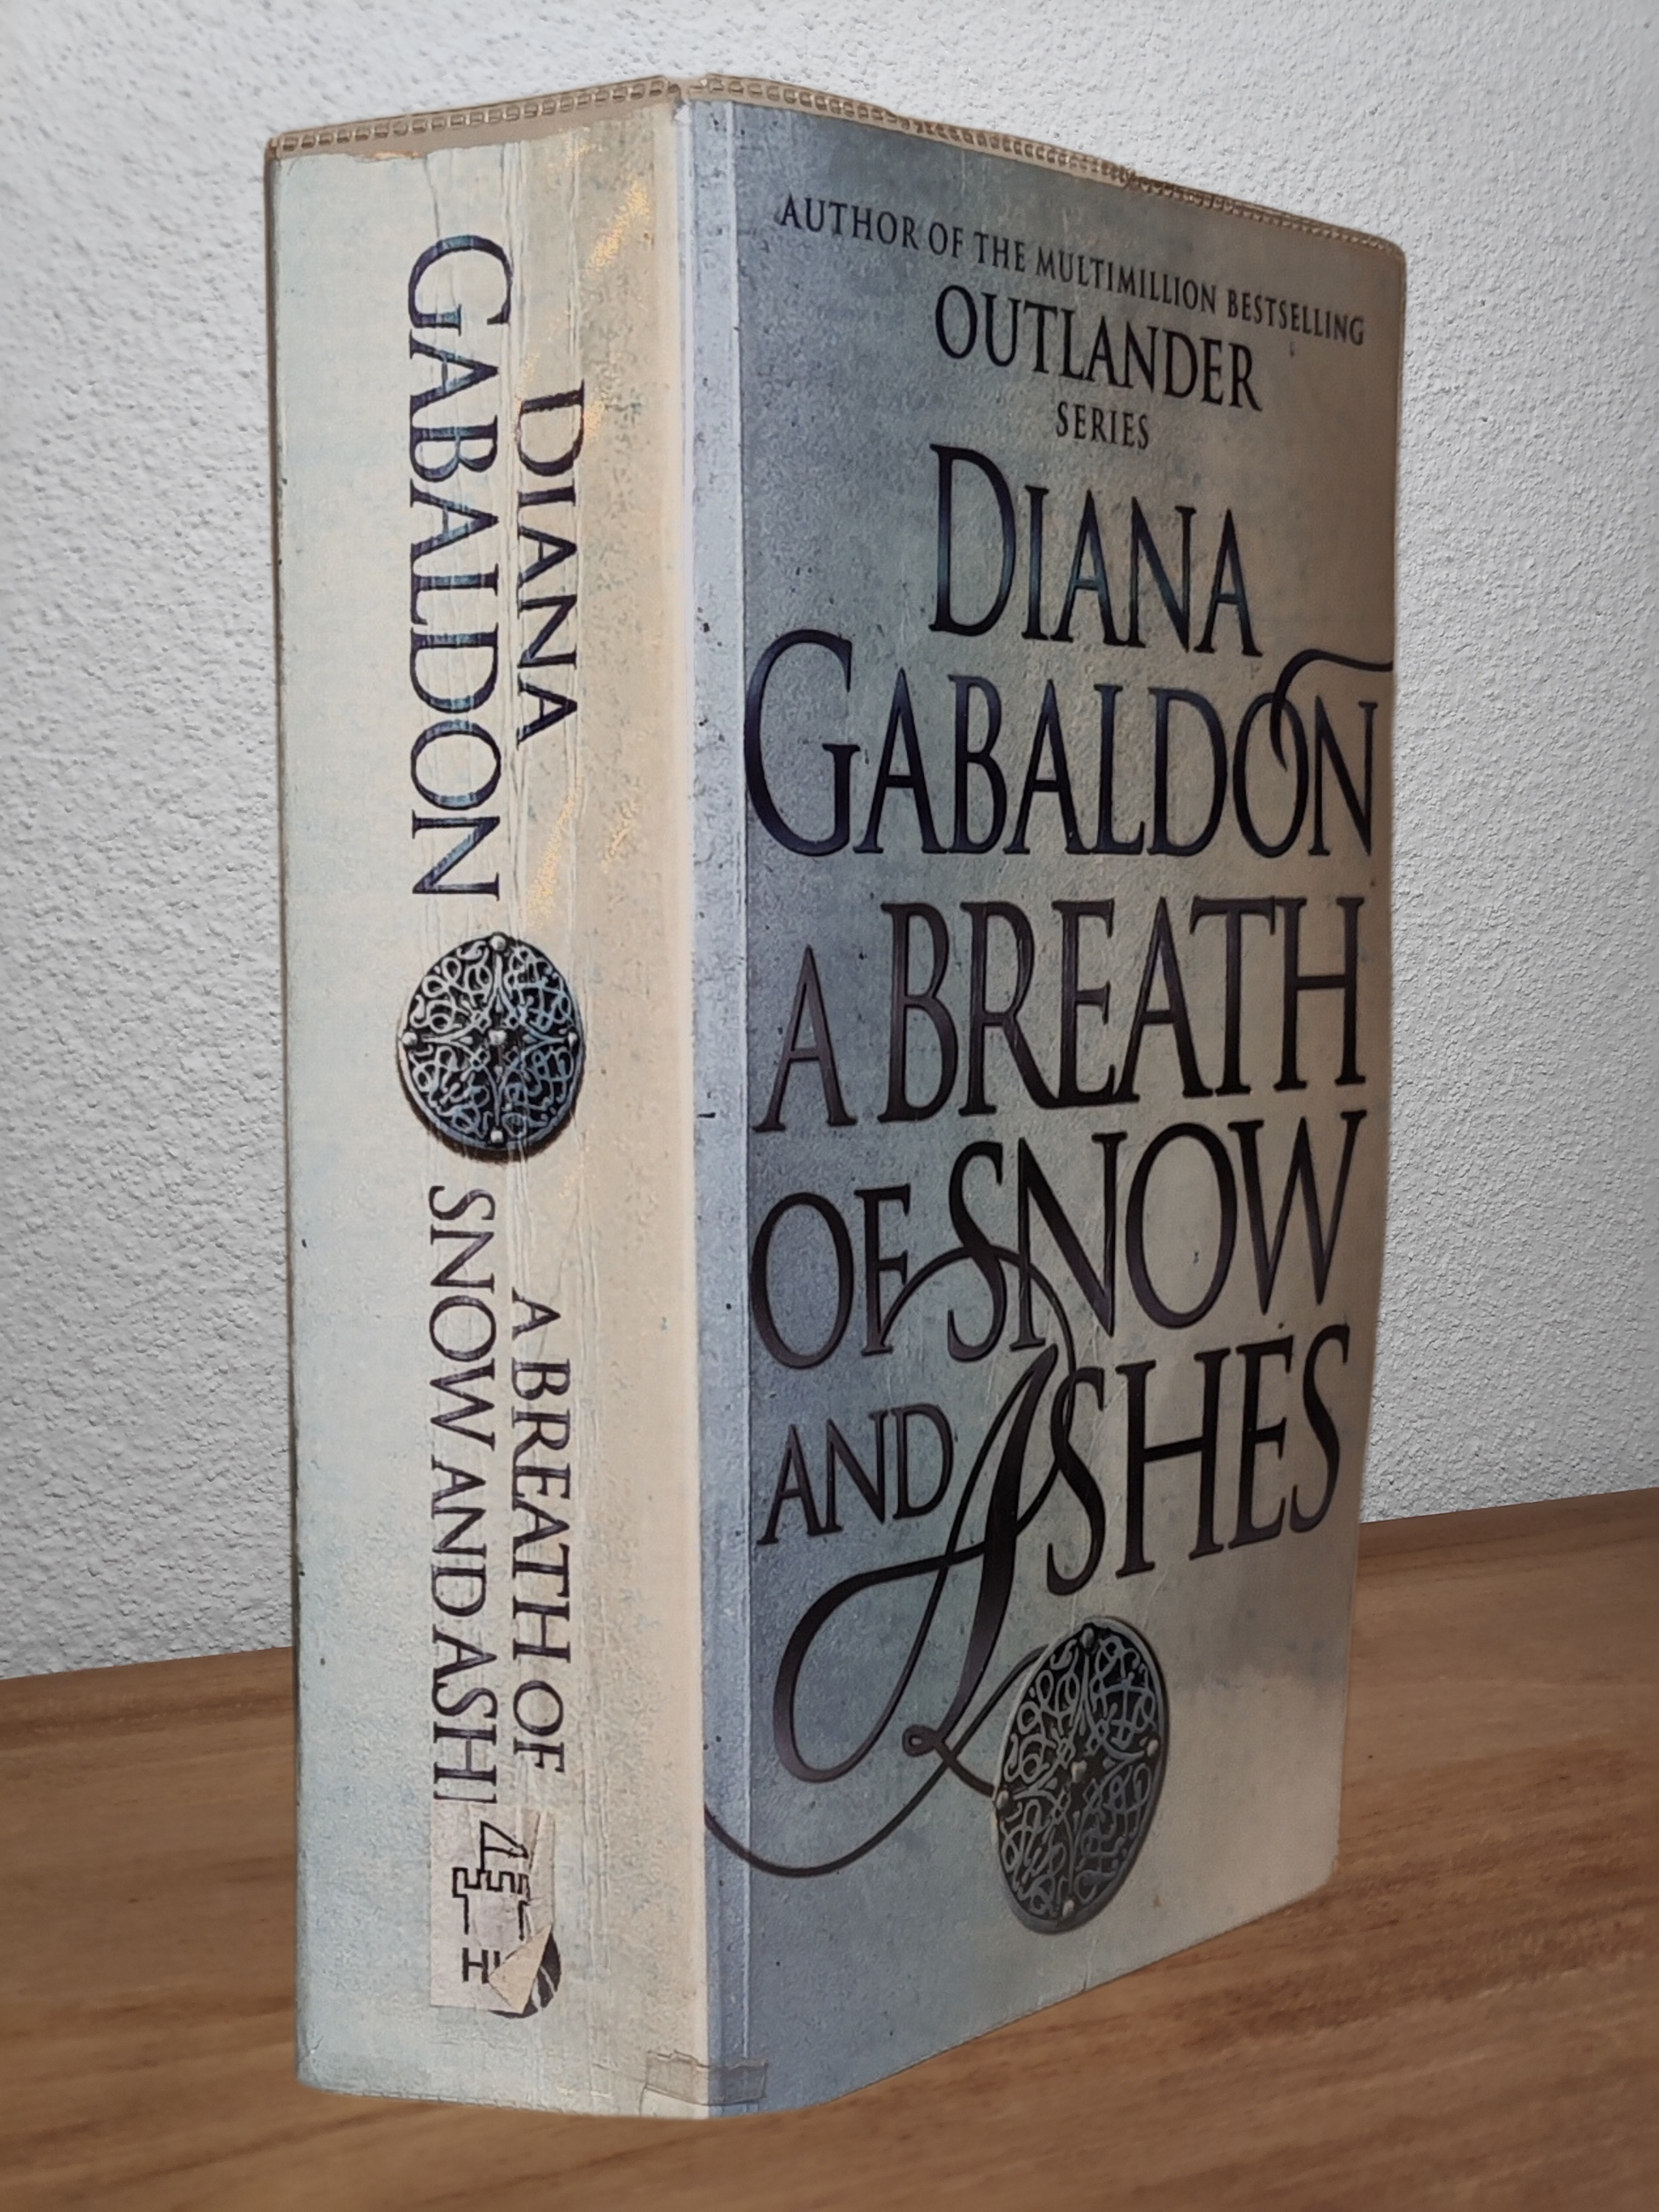 Diana Gabaldon - A Breath of Snow and Ashes (Outlander #6) - Second-hand english book to deliver in Zurich & Switzerland